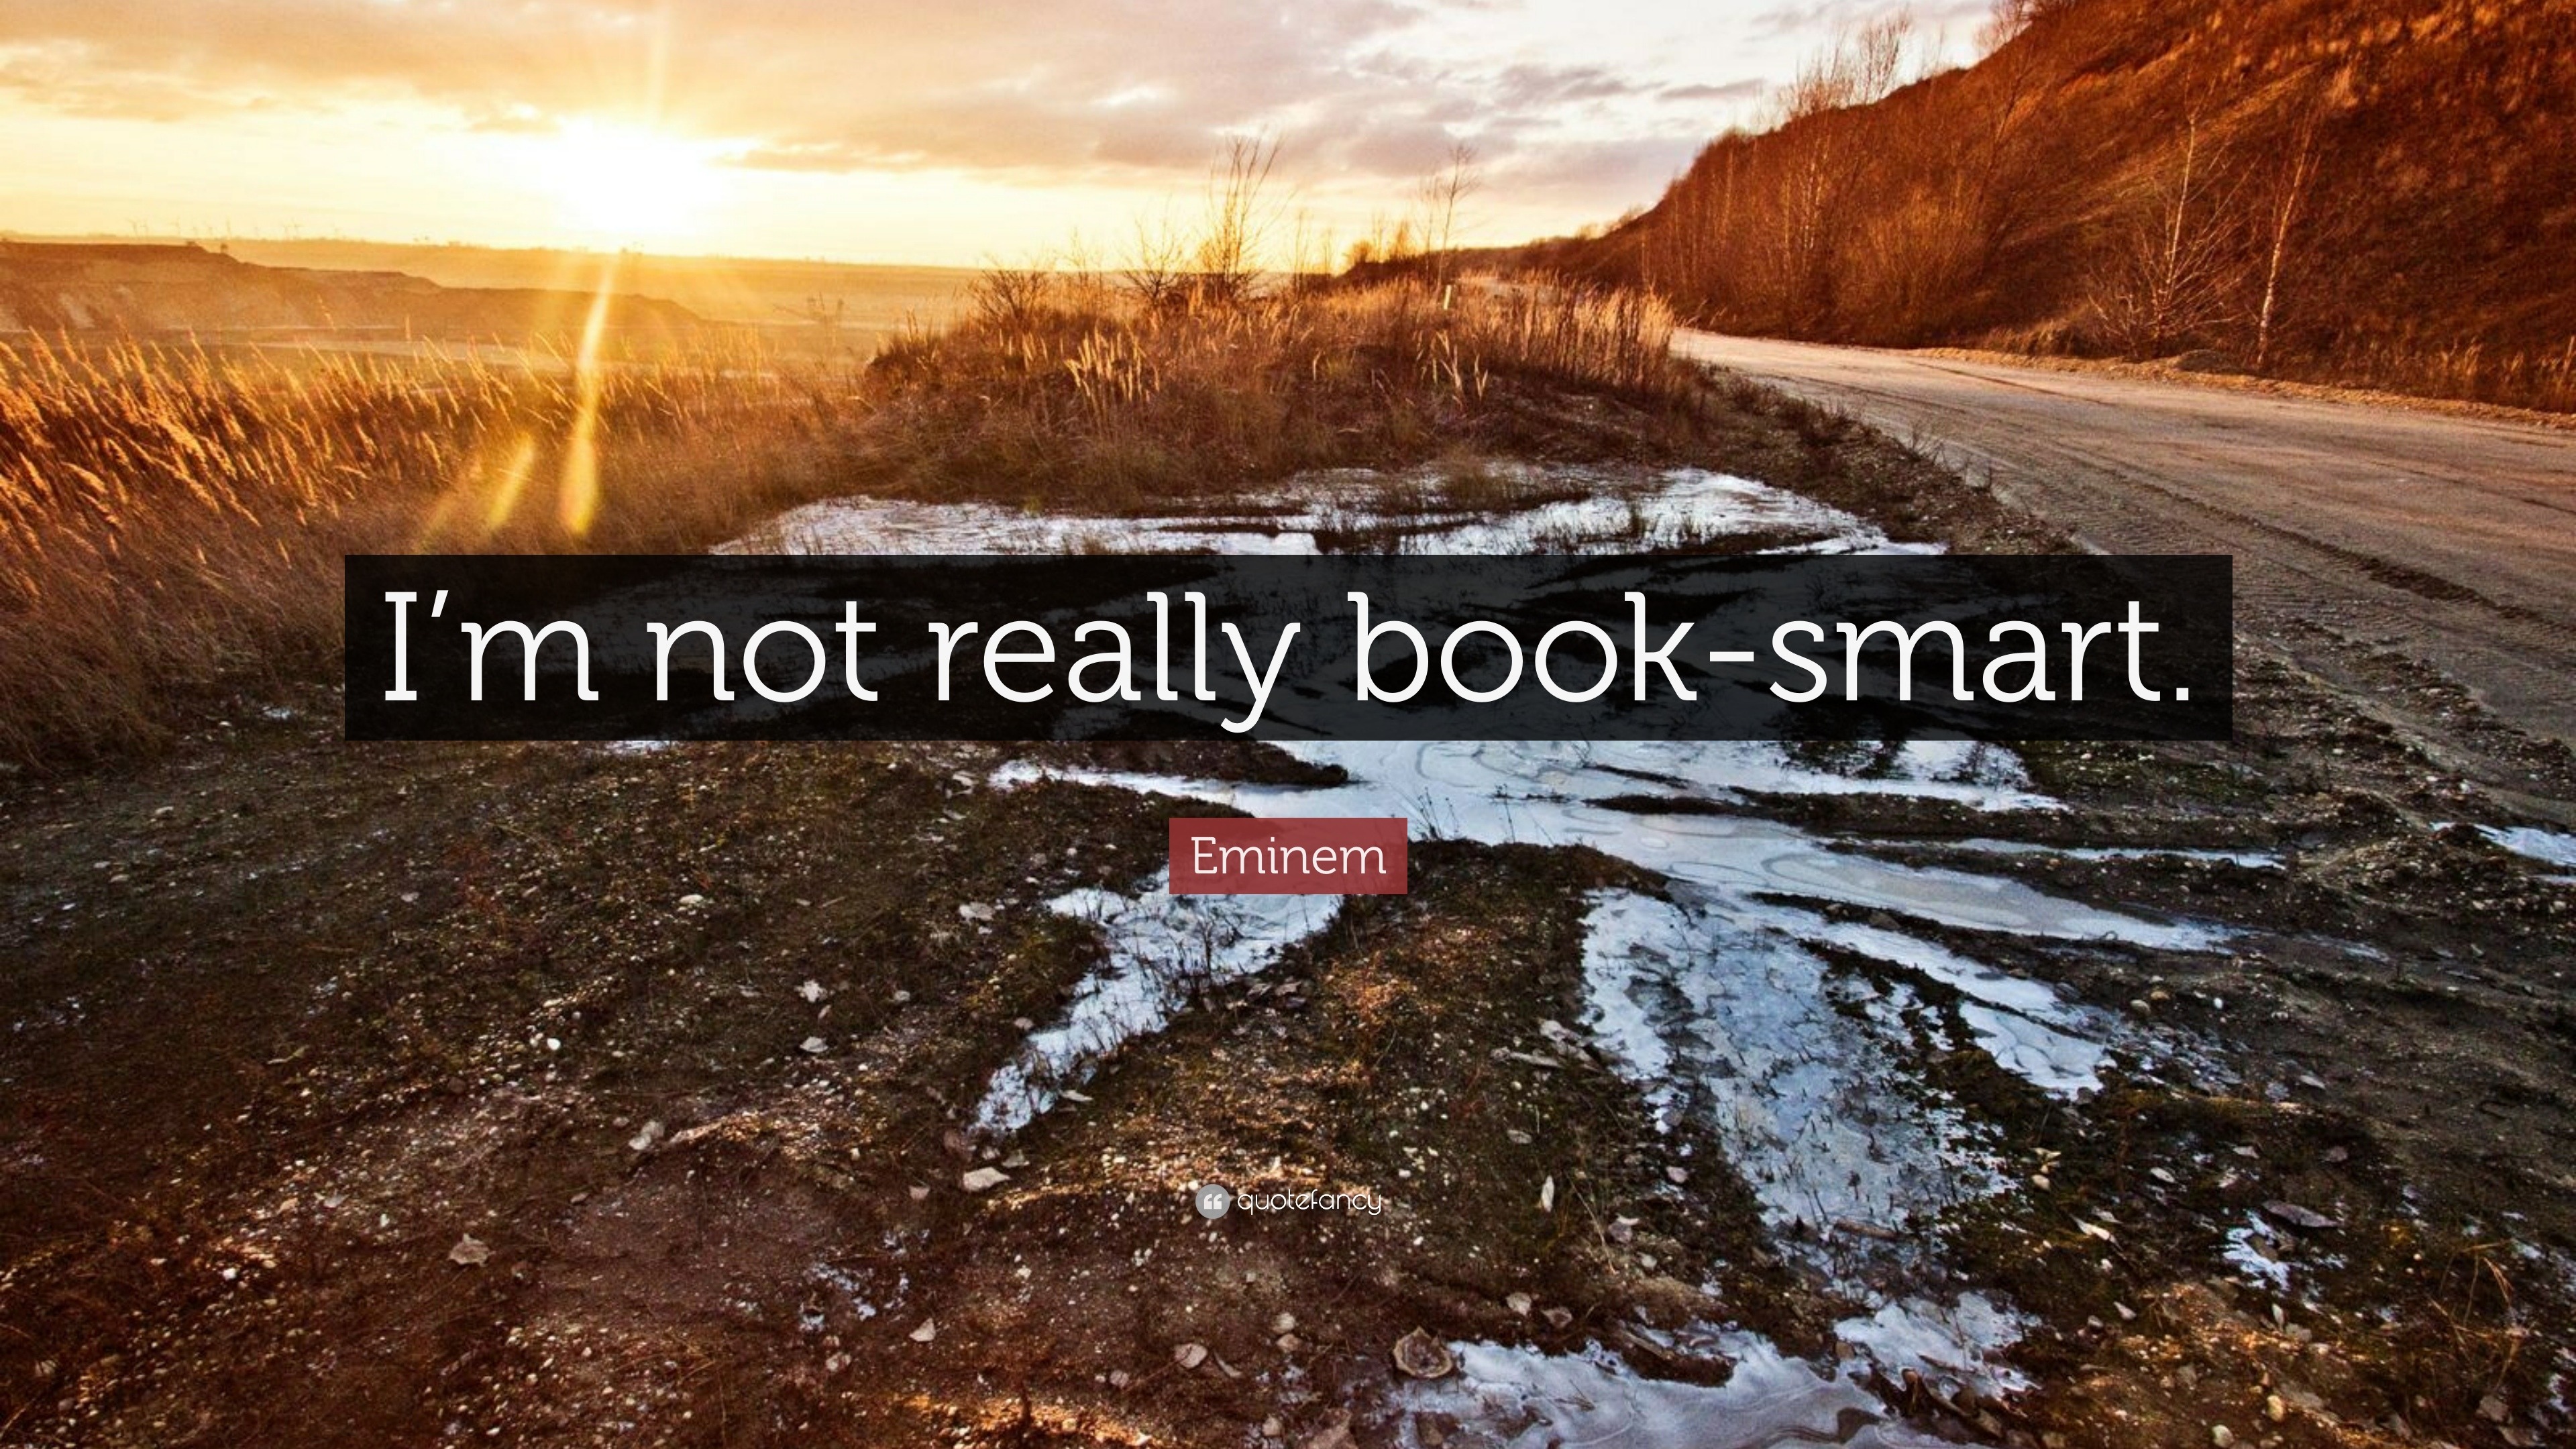 Eminem Quote: “I'm not really book-smart.”